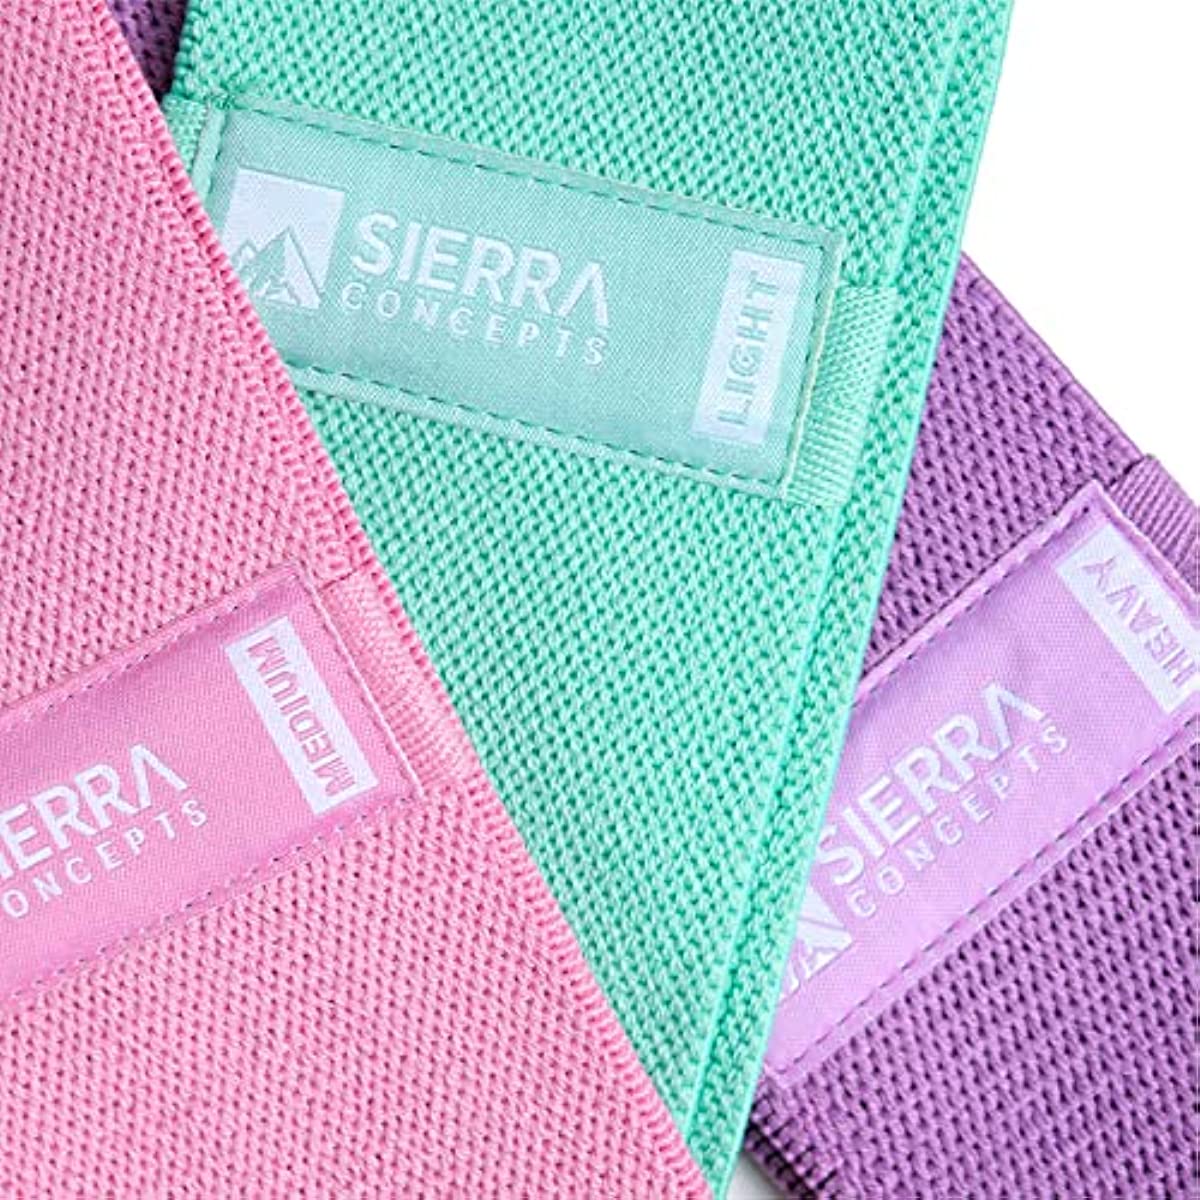 Sierra Concepts Resistance Booty Bands & 2-Pack Jump Rope Skipping Workout Set for Women - Fitness Exercise Equipment Working Out on Leg, Butt, Set of 3 Stretch Fabric Band at Home or Gym